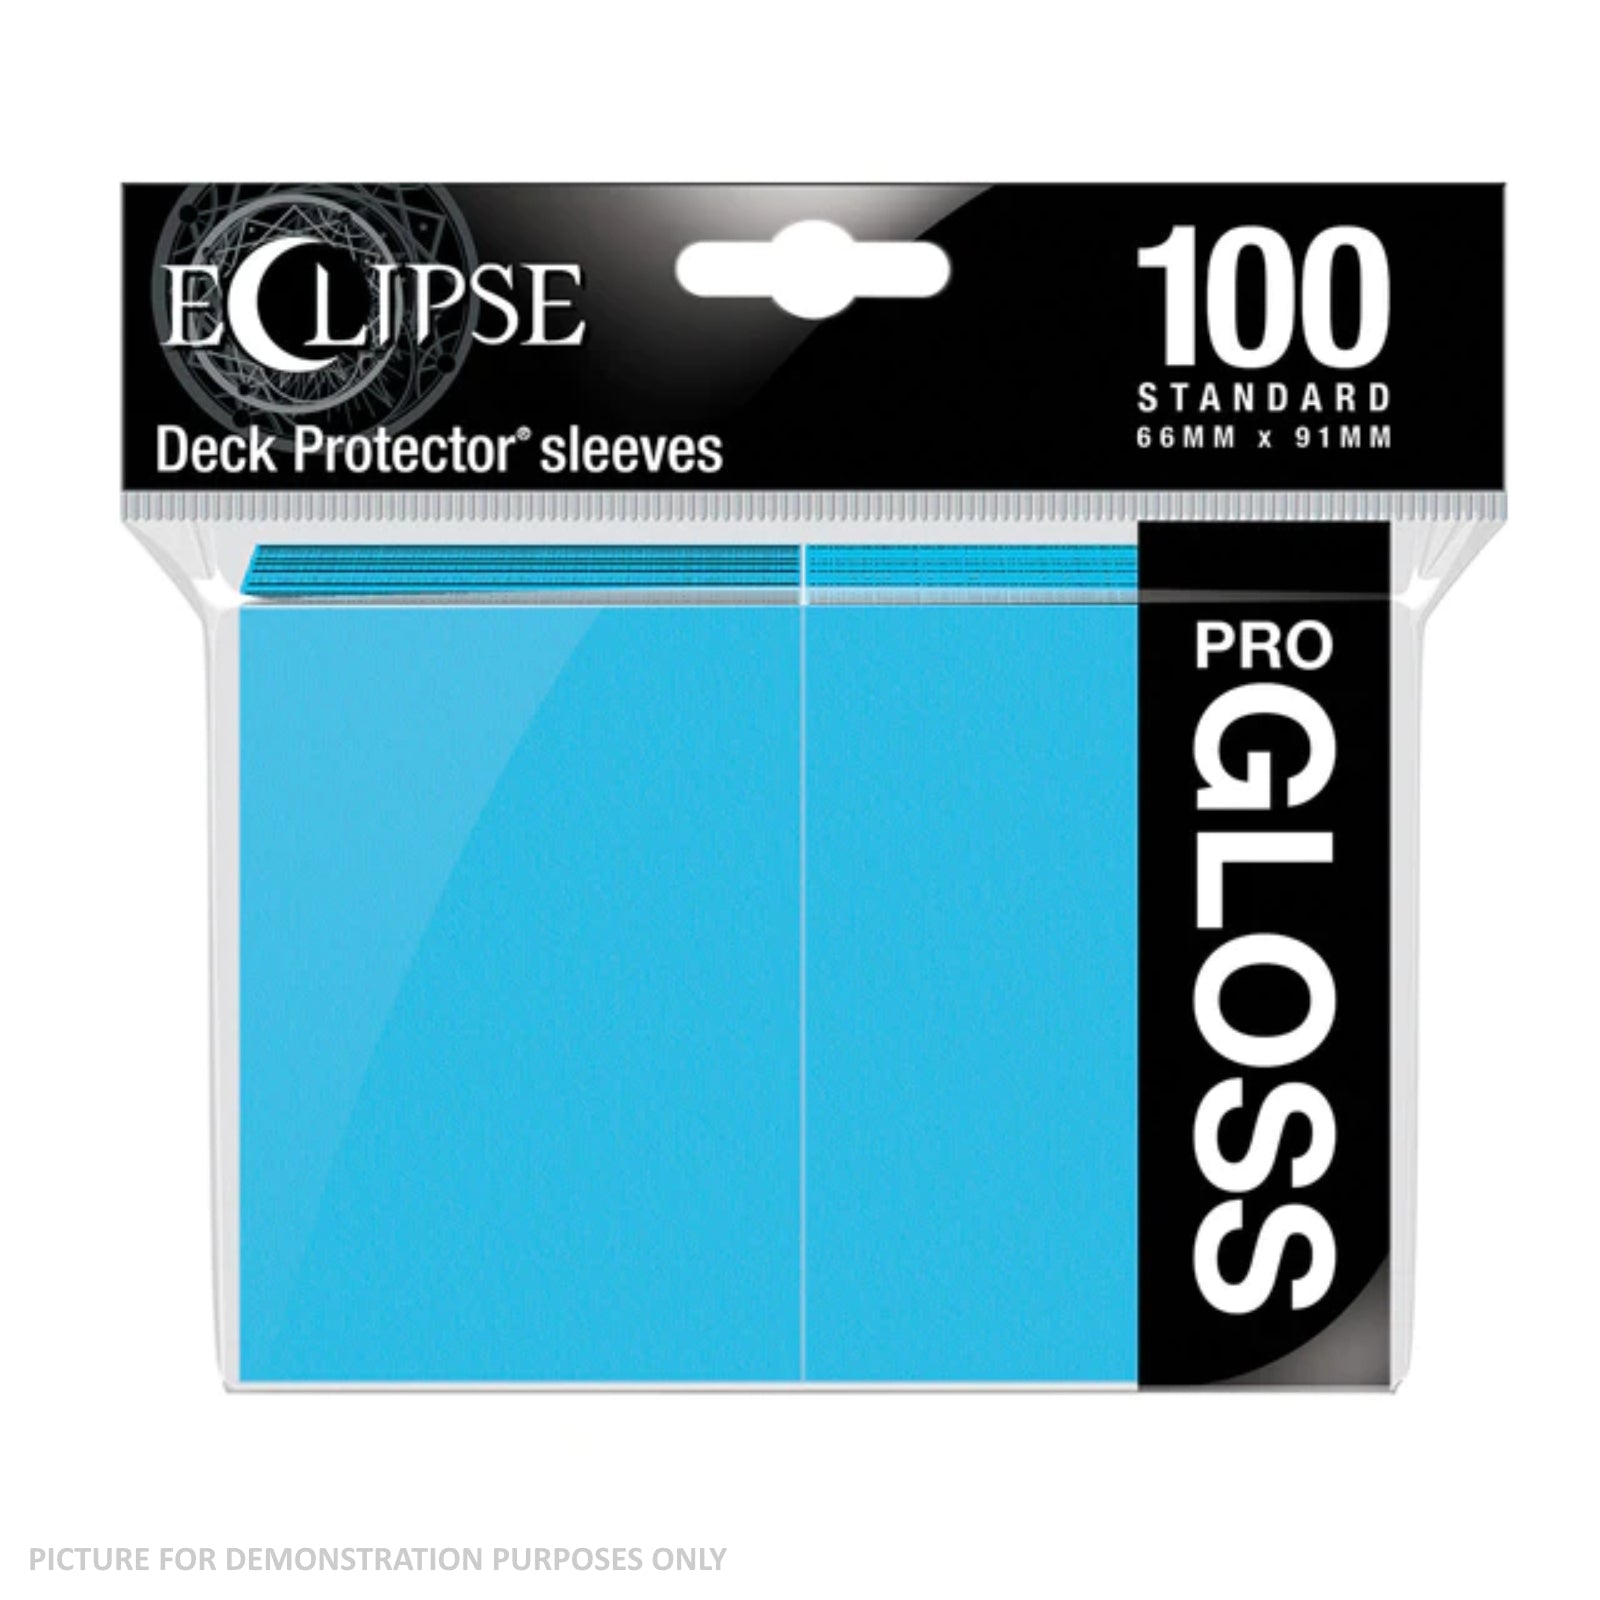 Ultra Pro Eclipse Gloss Standard Deck Protector Sleeves 100ct - Sky Blue